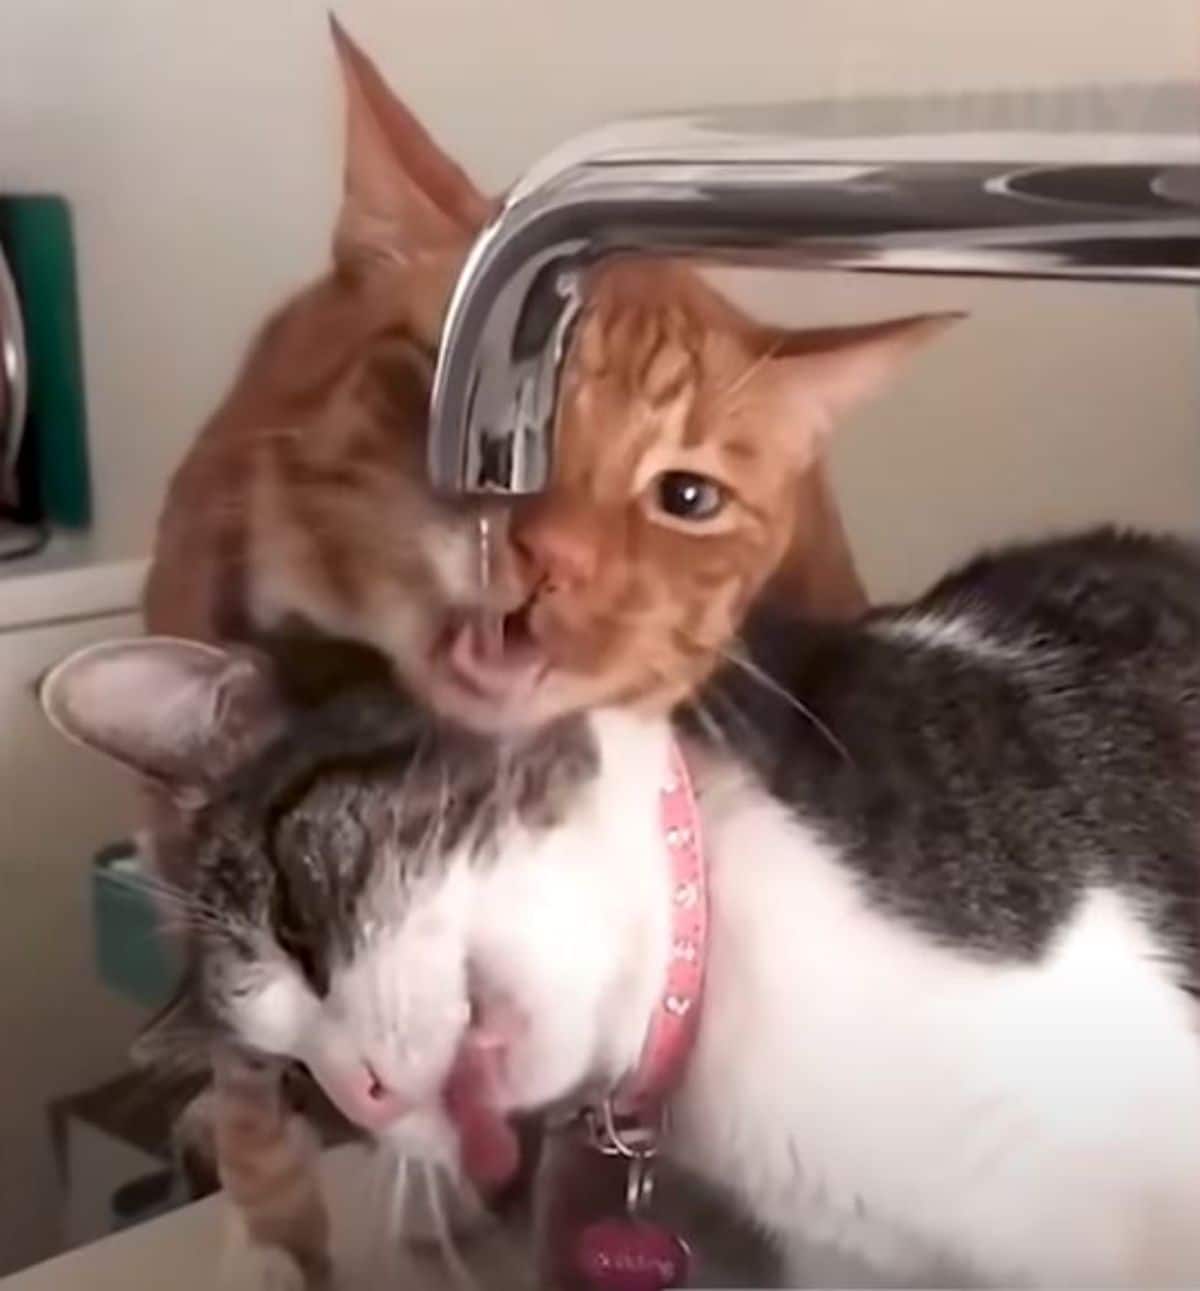 orange cat and black and white cat drinking water out of a faucet